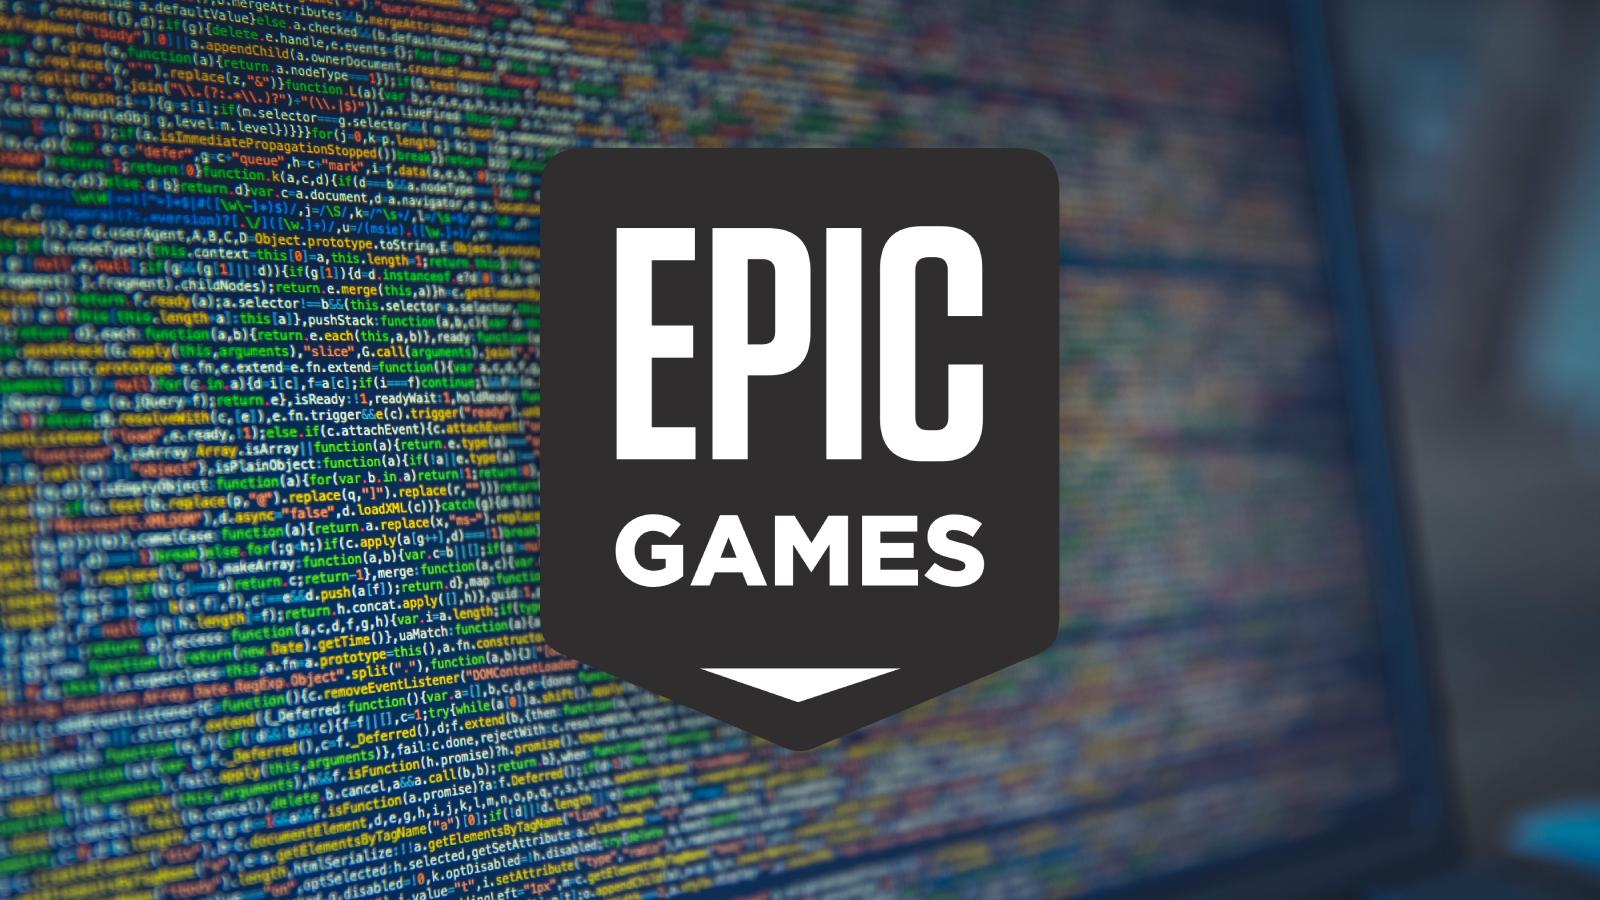 Epic games logo on background of laptop with code